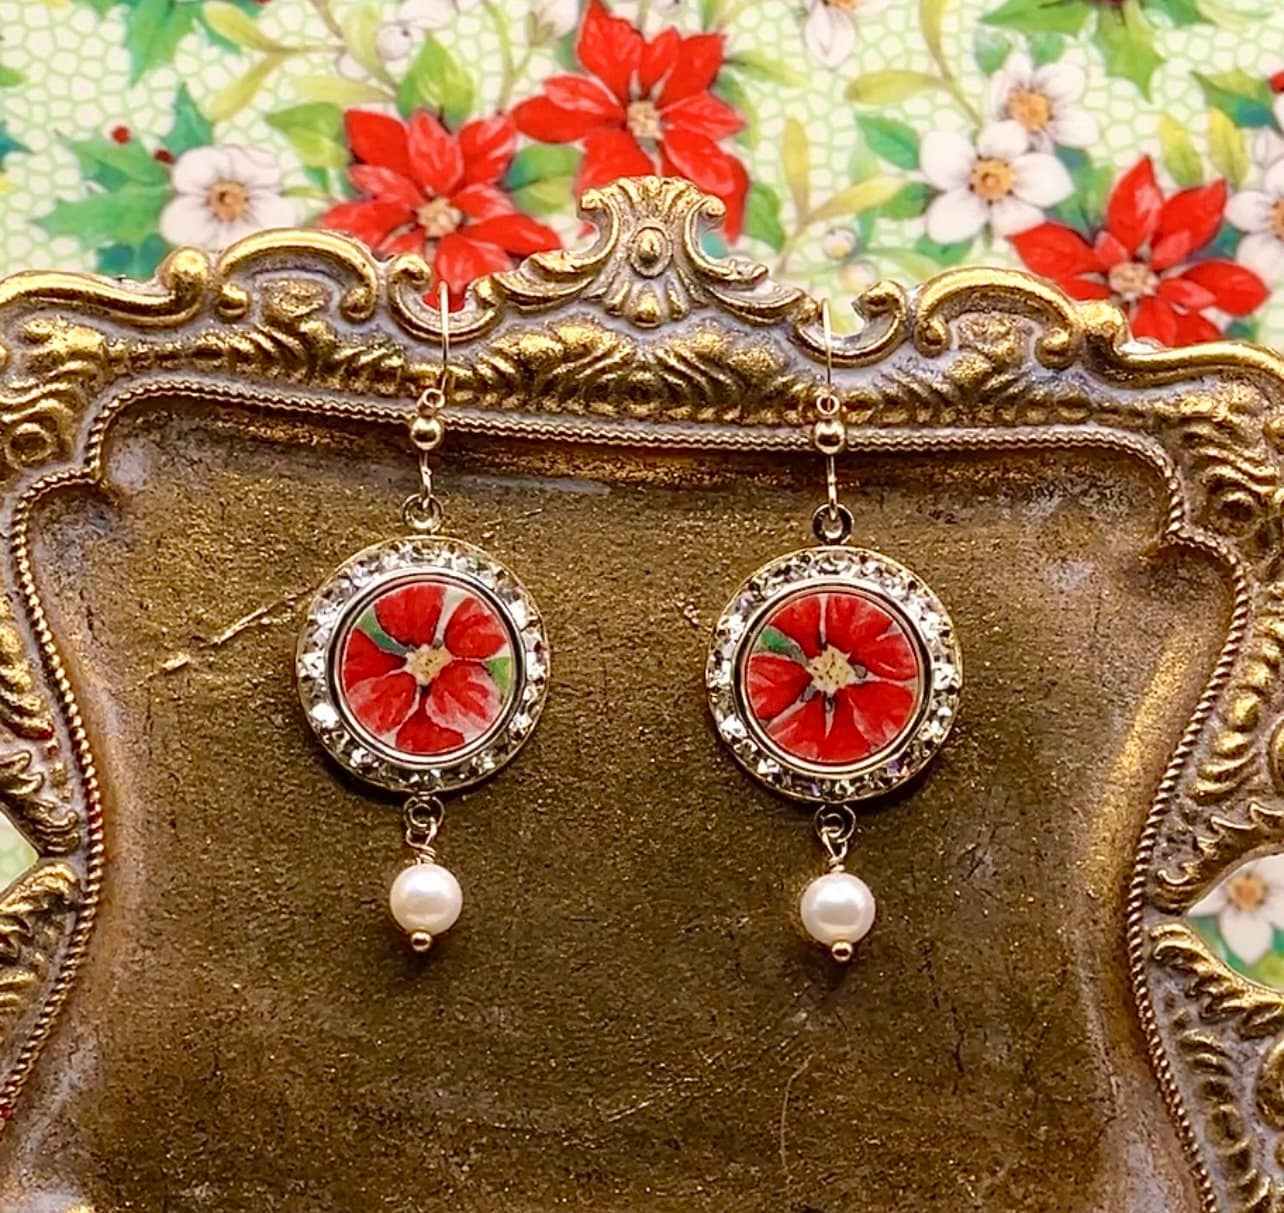 Gold Crystal Earrings, Shabby Chic Broken China Jewelry, Red Poinsettia Pearl Earrings